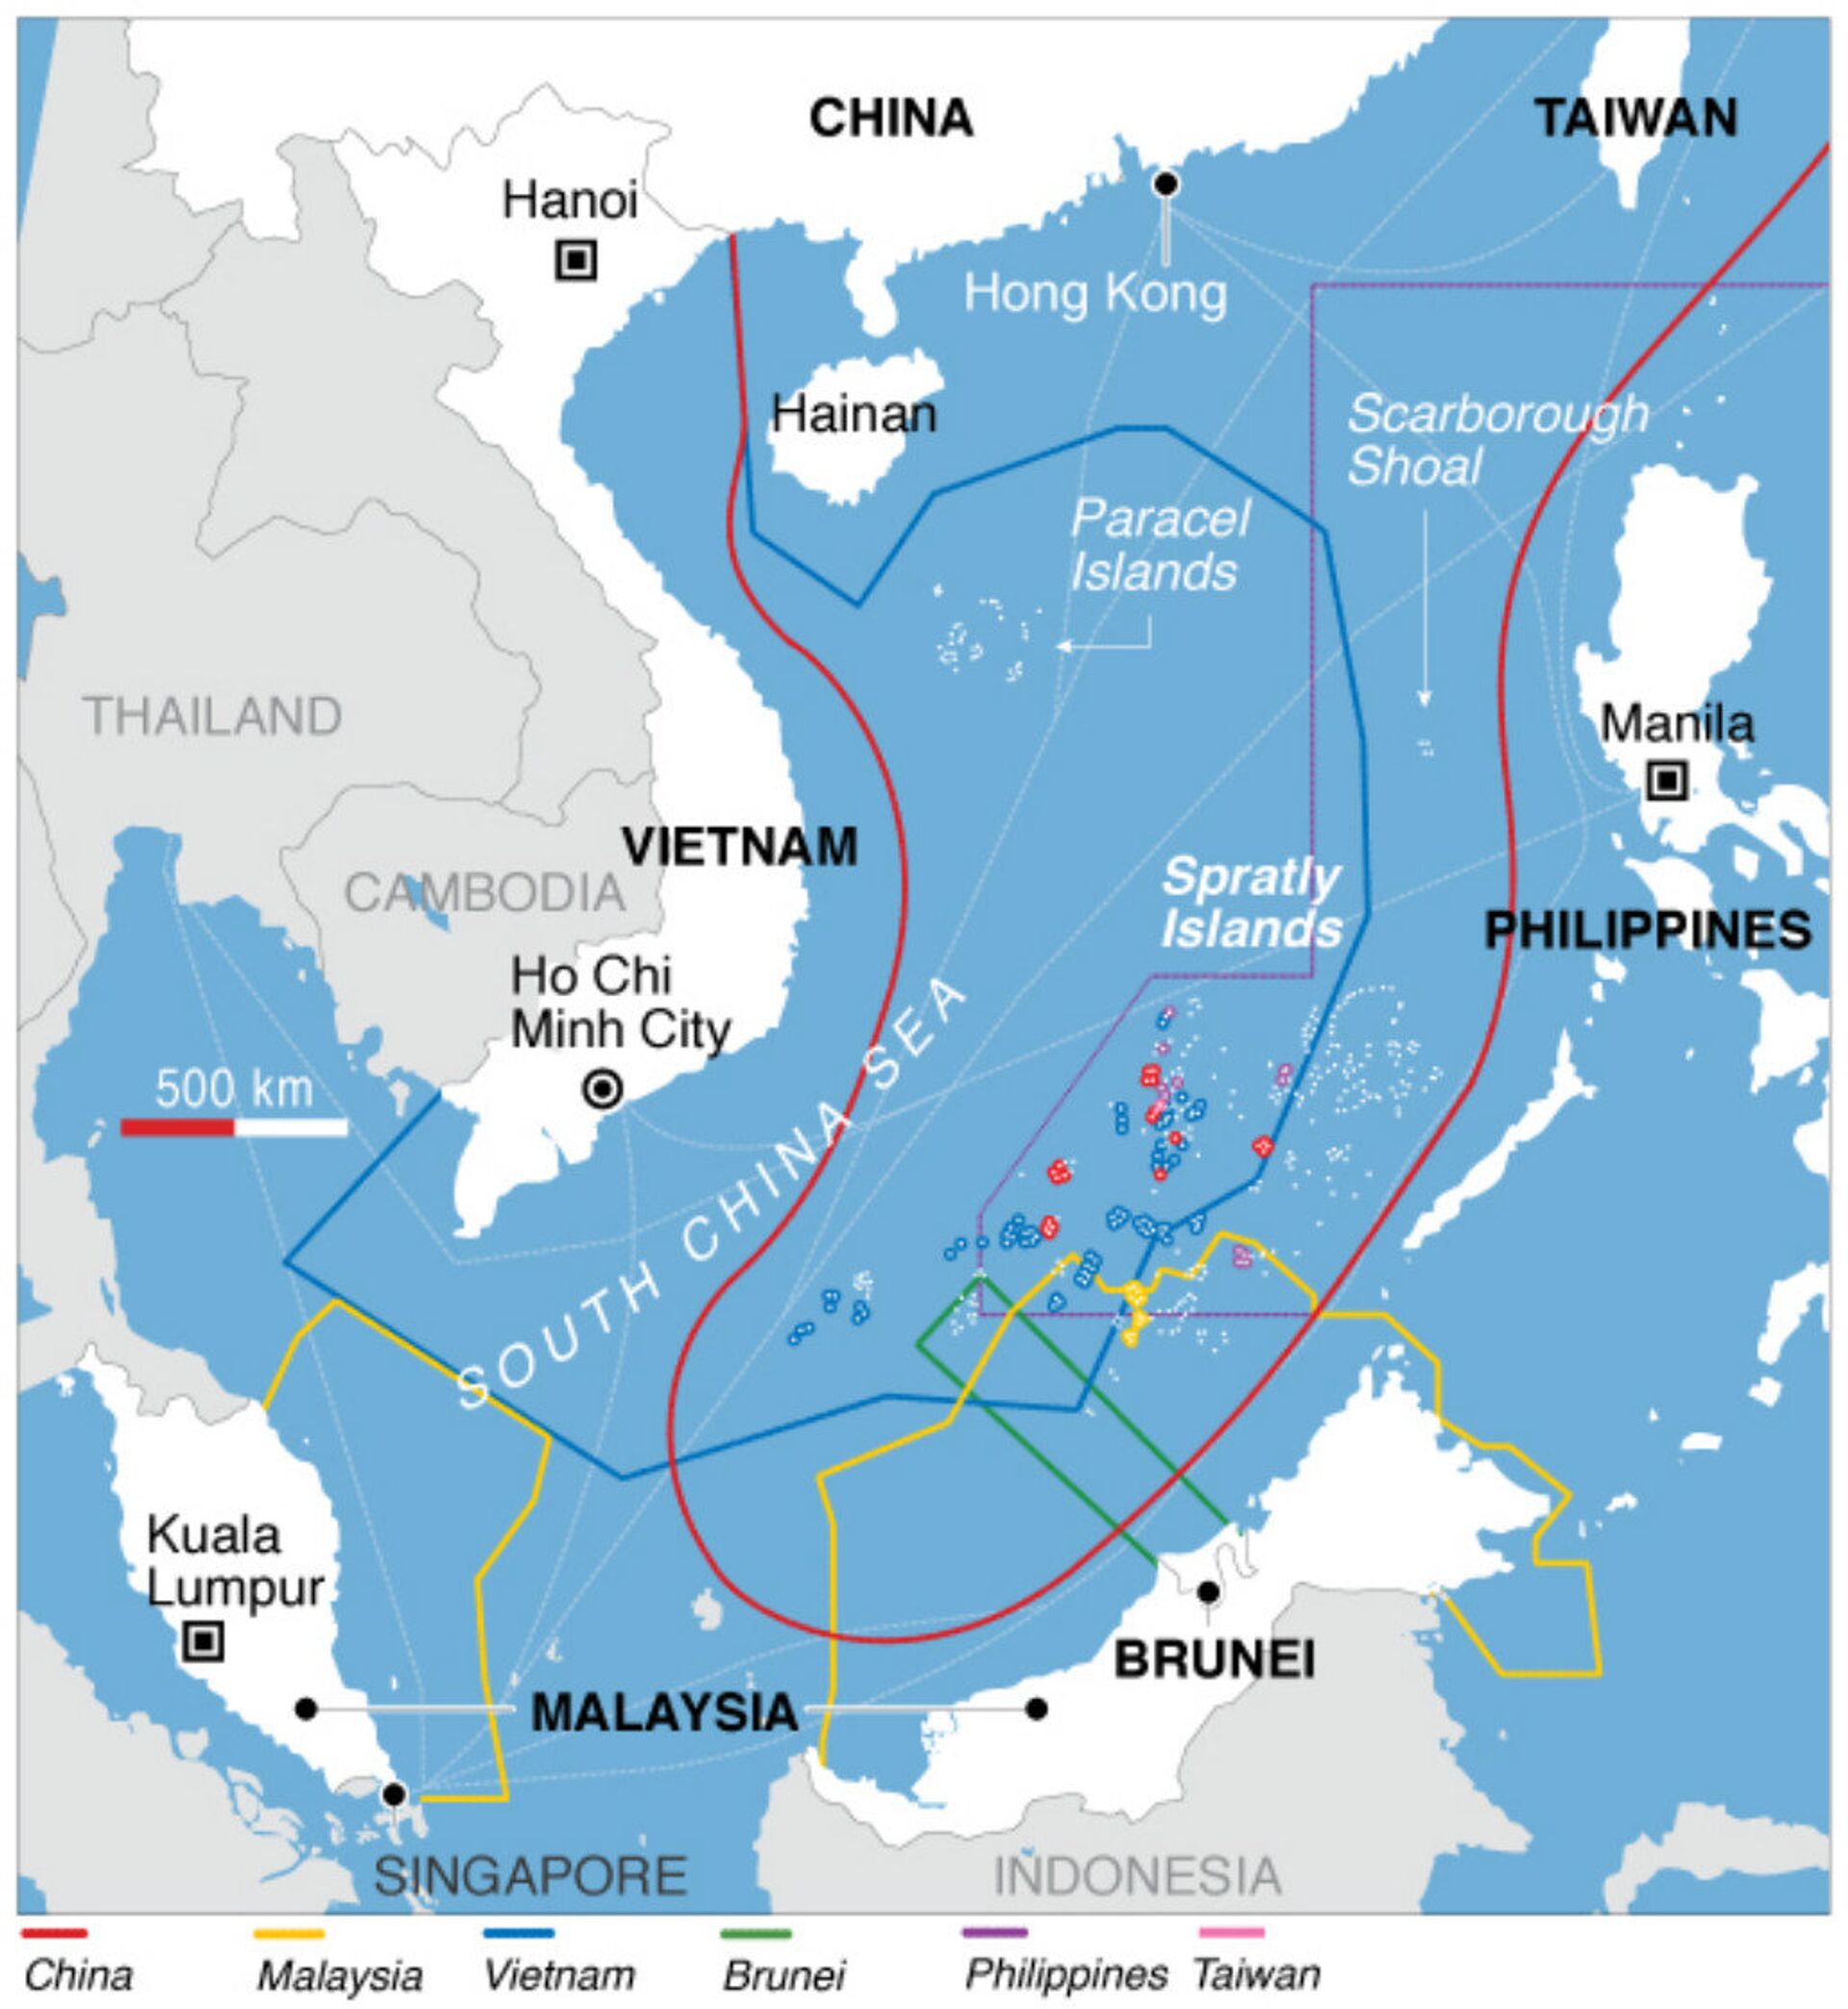 Map showing countries' claims in the South China Sea.  - Sputnik International, 1920, 14.10.2021